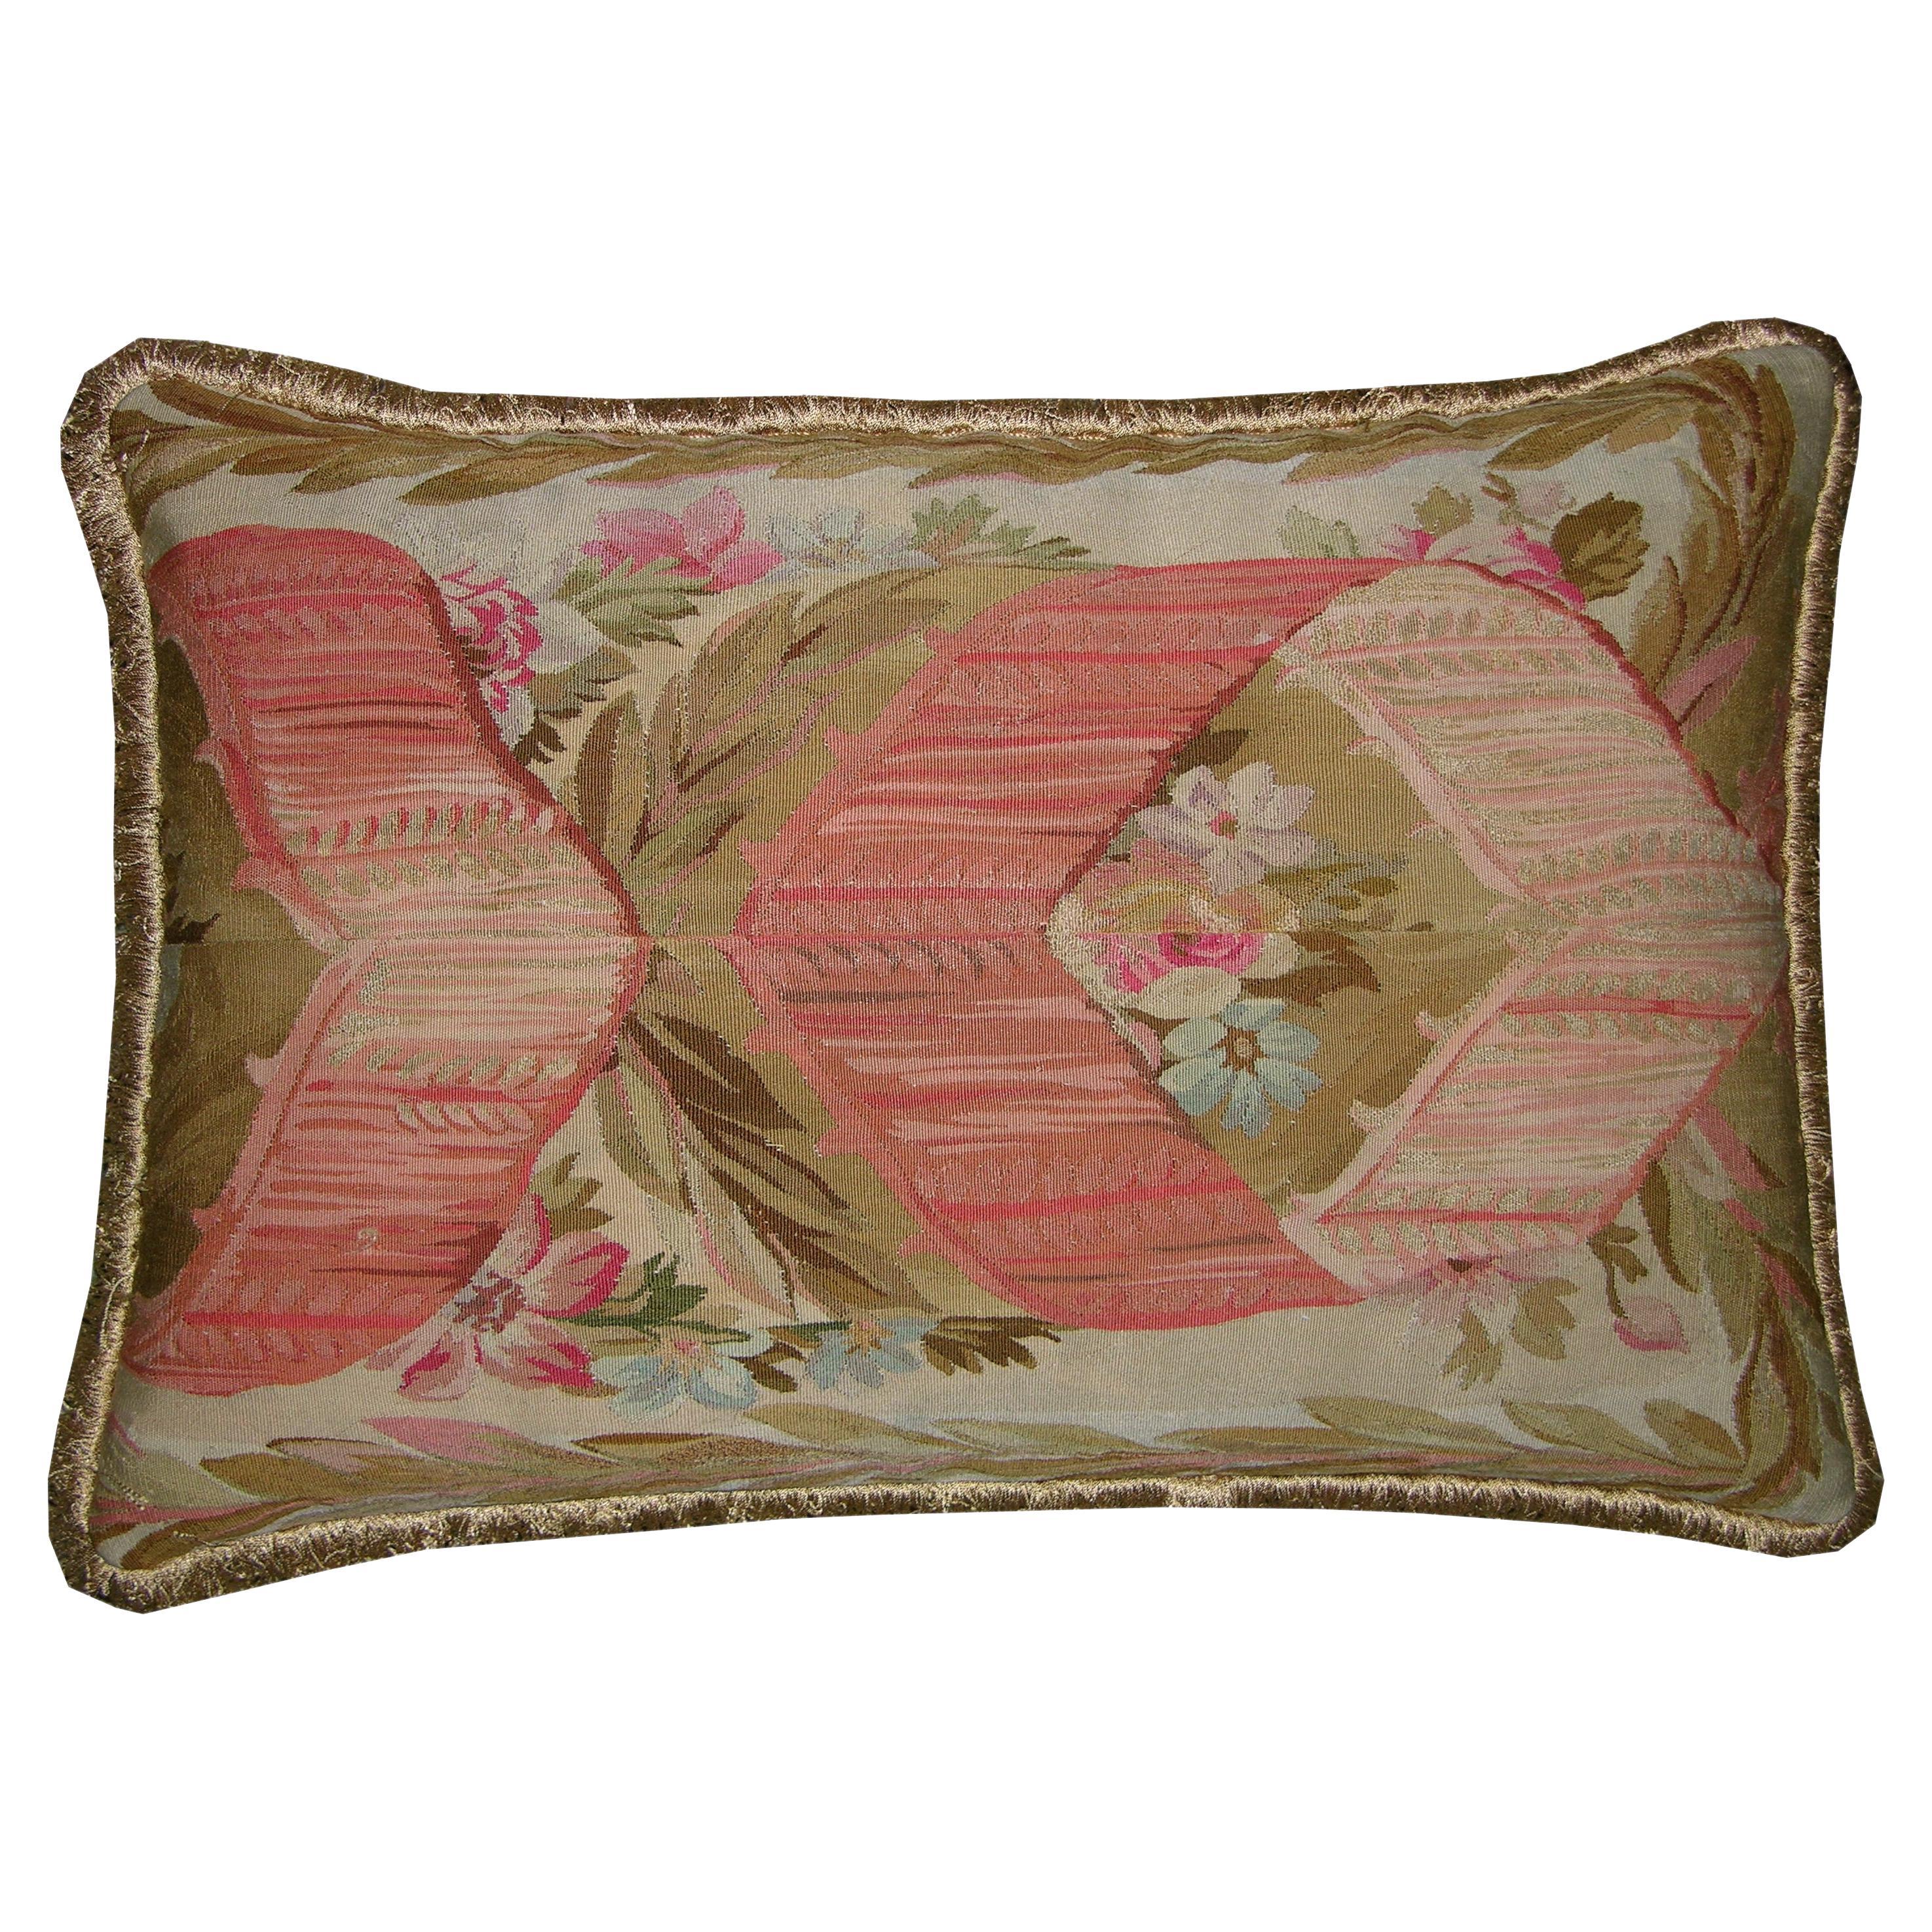 Circa 1860 Antique French Aubusson Pillow For Sale